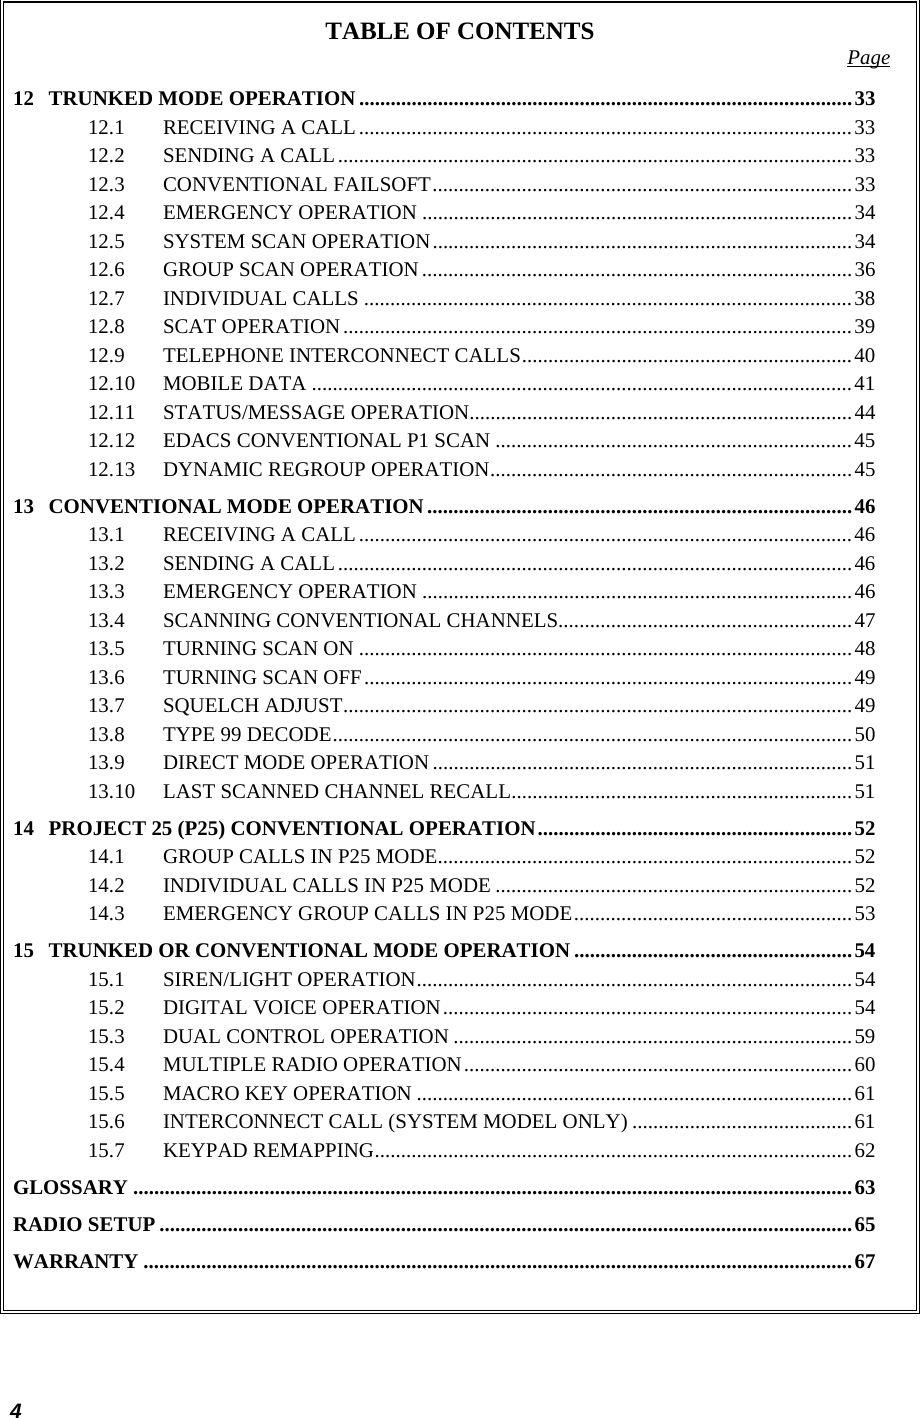  4 TABLE OF CONTENTS  Page 12 TRUNKED MODE OPERATION ..............................................................................................33 12.1 RECEIVING A CALL..............................................................................................33 12.2 SENDING A CALL..................................................................................................33 12.3 CONVENTIONAL FAILSOFT................................................................................33 12.4 EMERGENCY OPERATION ..................................................................................34 12.5 SYSTEM SCAN OPERATION................................................................................34 12.6 GROUP SCAN OPERATION..................................................................................36 12.7 INDIVIDUAL CALLS .............................................................................................38 12.8 SCAT OPERATION.................................................................................................39 12.9 TELEPHONE INTERCONNECT CALLS...............................................................40 12.10 MOBILE DATA .......................................................................................................41 12.11 STATUS/MESSAGE OPERATION.........................................................................44 12.12 EDACS CONVENTIONAL P1 SCAN ....................................................................45 12.13 DYNAMIC REGROUP OPERATION.....................................................................45 13 CONVENTIONAL MODE OPERATION.................................................................................46 13.1 RECEIVING A CALL..............................................................................................46 13.2 SENDING A CALL..................................................................................................46 13.3 EMERGENCY OPERATION ..................................................................................46 13.4 SCANNING CONVENTIONAL CHANNELS........................................................47 13.5 TURNING SCAN ON ..............................................................................................48 13.6 TURNING SCAN OFF.............................................................................................49 13.7 SQUELCH ADJUST.................................................................................................49 13.8 TYPE 99 DECODE...................................................................................................50 13.9 DIRECT MODE OPERATION ................................................................................51 13.10 LAST SCANNED CHANNEL RECALL.................................................................51 14 PROJECT 25 (P25) CONVENTIONAL OPERATION............................................................52 14.1 GROUP CALLS IN P25 MODE...............................................................................52 14.2 INDIVIDUAL CALLS IN P25 MODE ....................................................................52 14.3 EMERGENCY GROUP CALLS IN P25 MODE.....................................................53 15 TRUNKED OR CONVENTIONAL MODE OPERATION .....................................................54 15.1 SIREN/LIGHT OPERATION...................................................................................54 15.2 DIGITAL VOICE OPERATION..............................................................................54 15.3 DUAL CONTROL OPERATION ............................................................................59 15.4 MULTIPLE RADIO OPERATION..........................................................................60 15.5 MACRO KEY OPERATION ...................................................................................61 15.6 INTERCONNECT CALL (SYSTEM MODEL ONLY) ..........................................61 15.7 KEYPAD REMAPPING...........................................................................................62 GLOSSARY .........................................................................................................................................63 RADIO SETUP ....................................................................................................................................65 WARRANTY .......................................................................................................................................67  